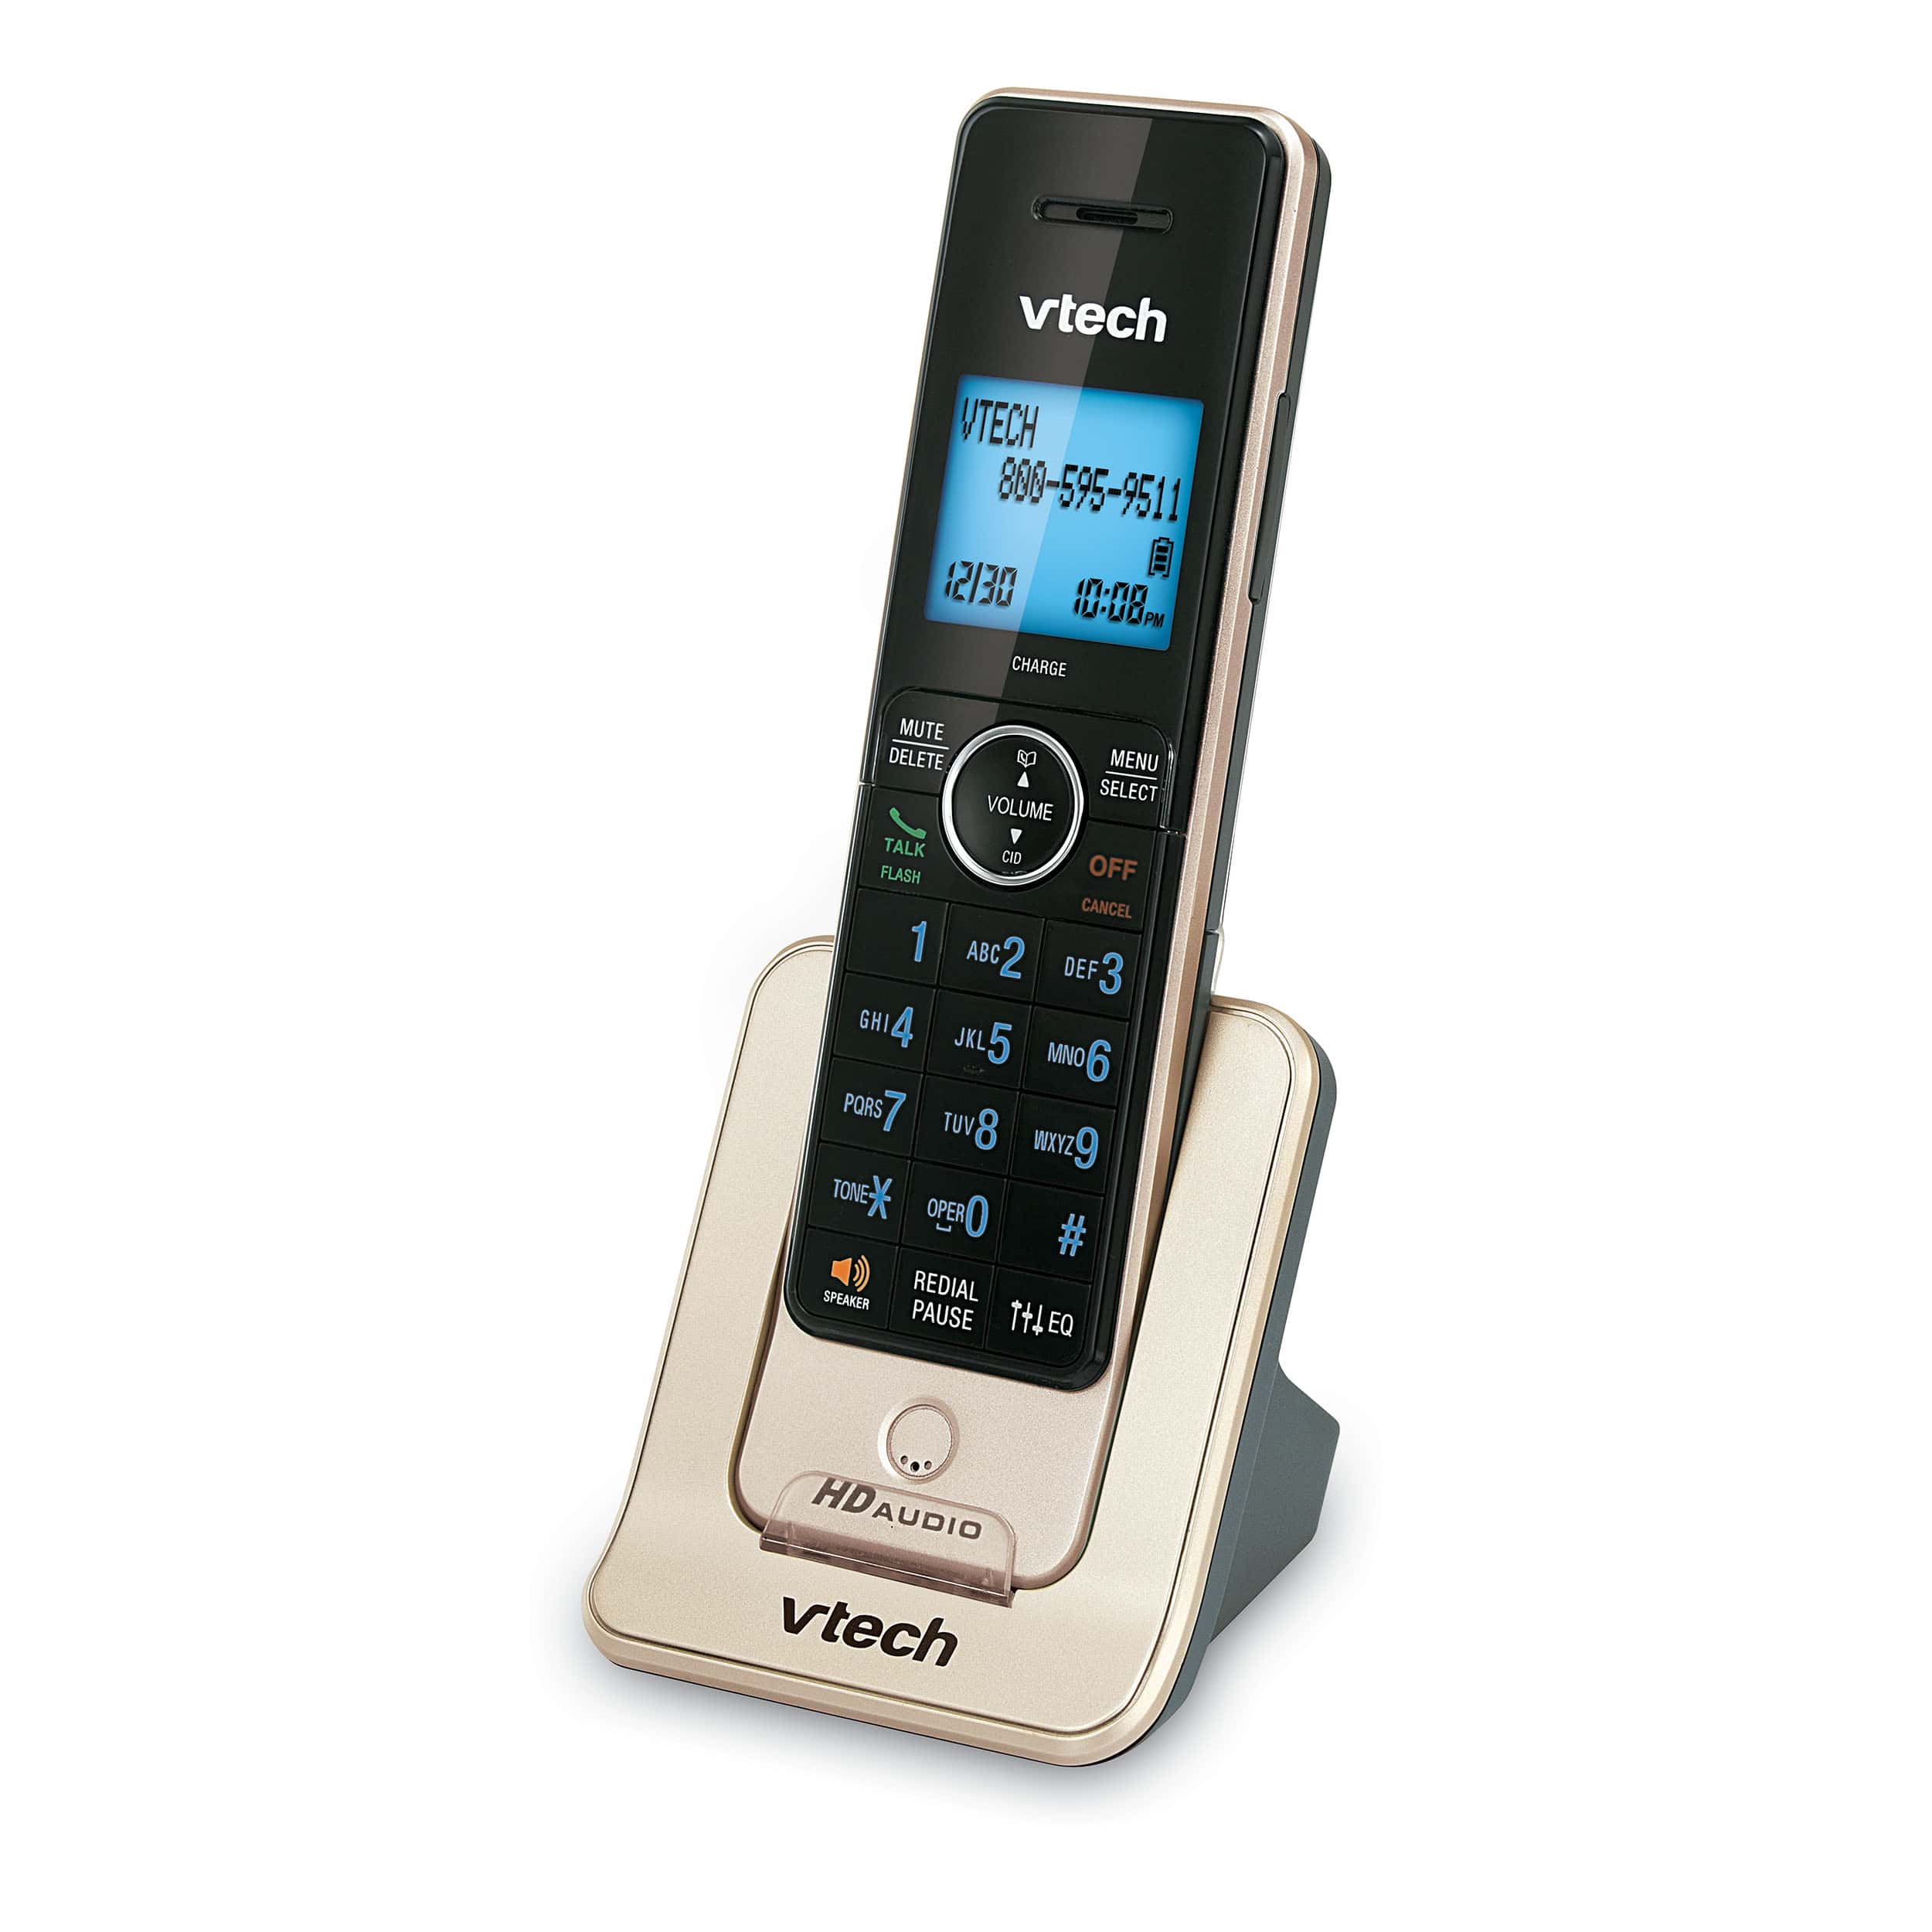 3 Handset Phone System with Caller ID/Call Waiting